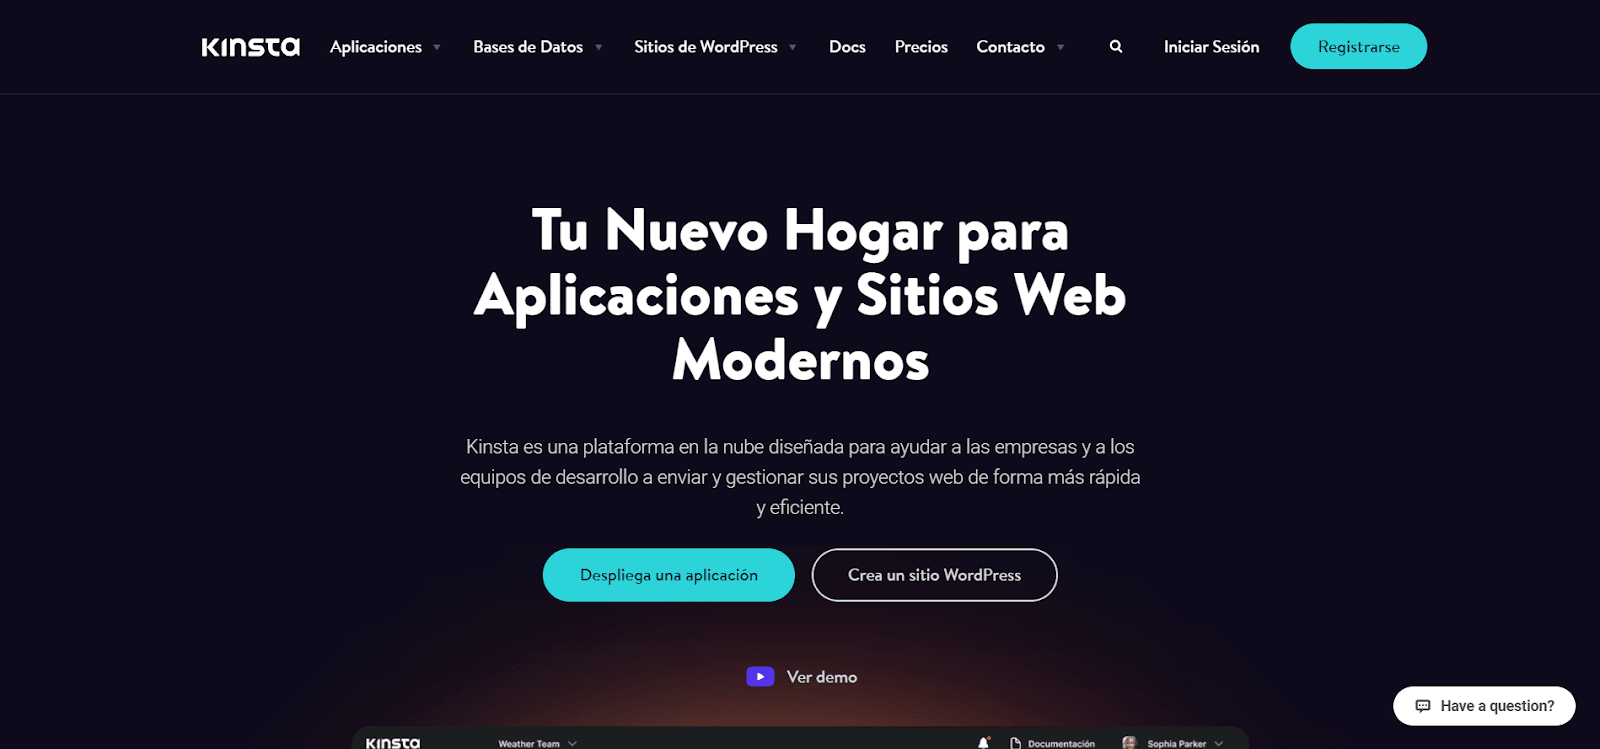 The Kinsta home page in Spanish.